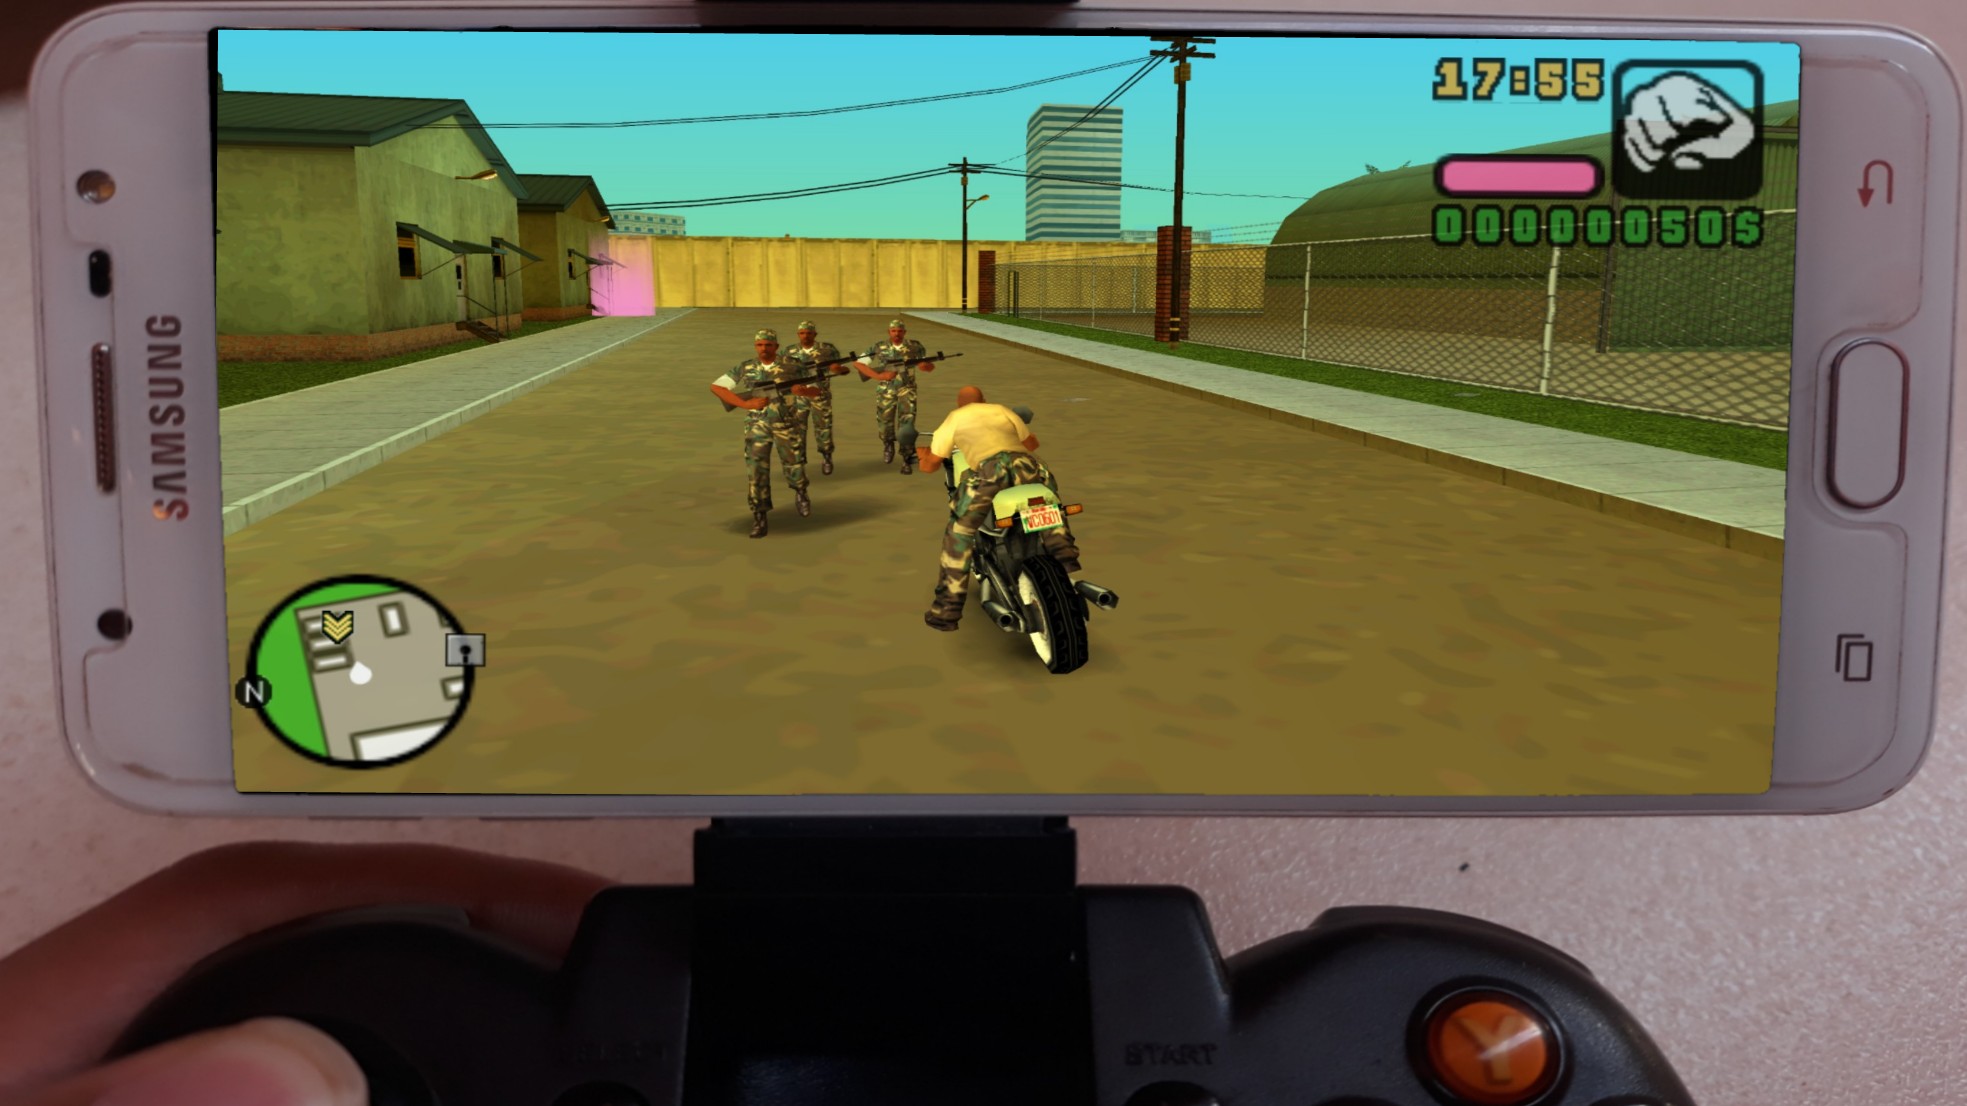 gta for ppsspp